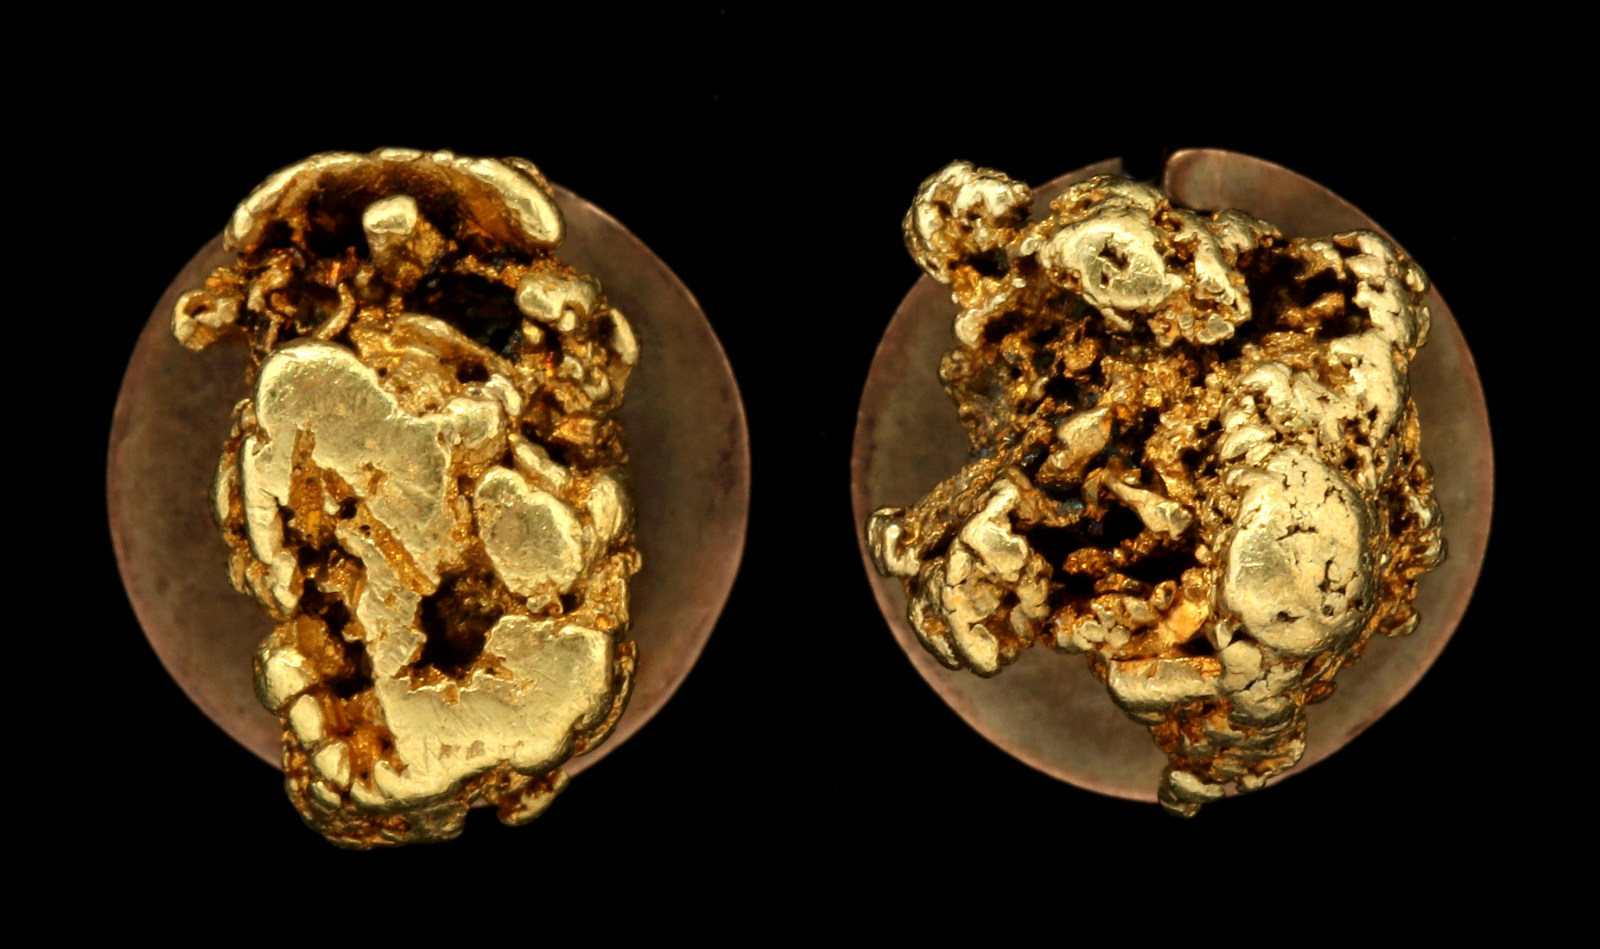 A PAIR OF VINTAGE 18K GOLD NUGGET CUFF LINKS